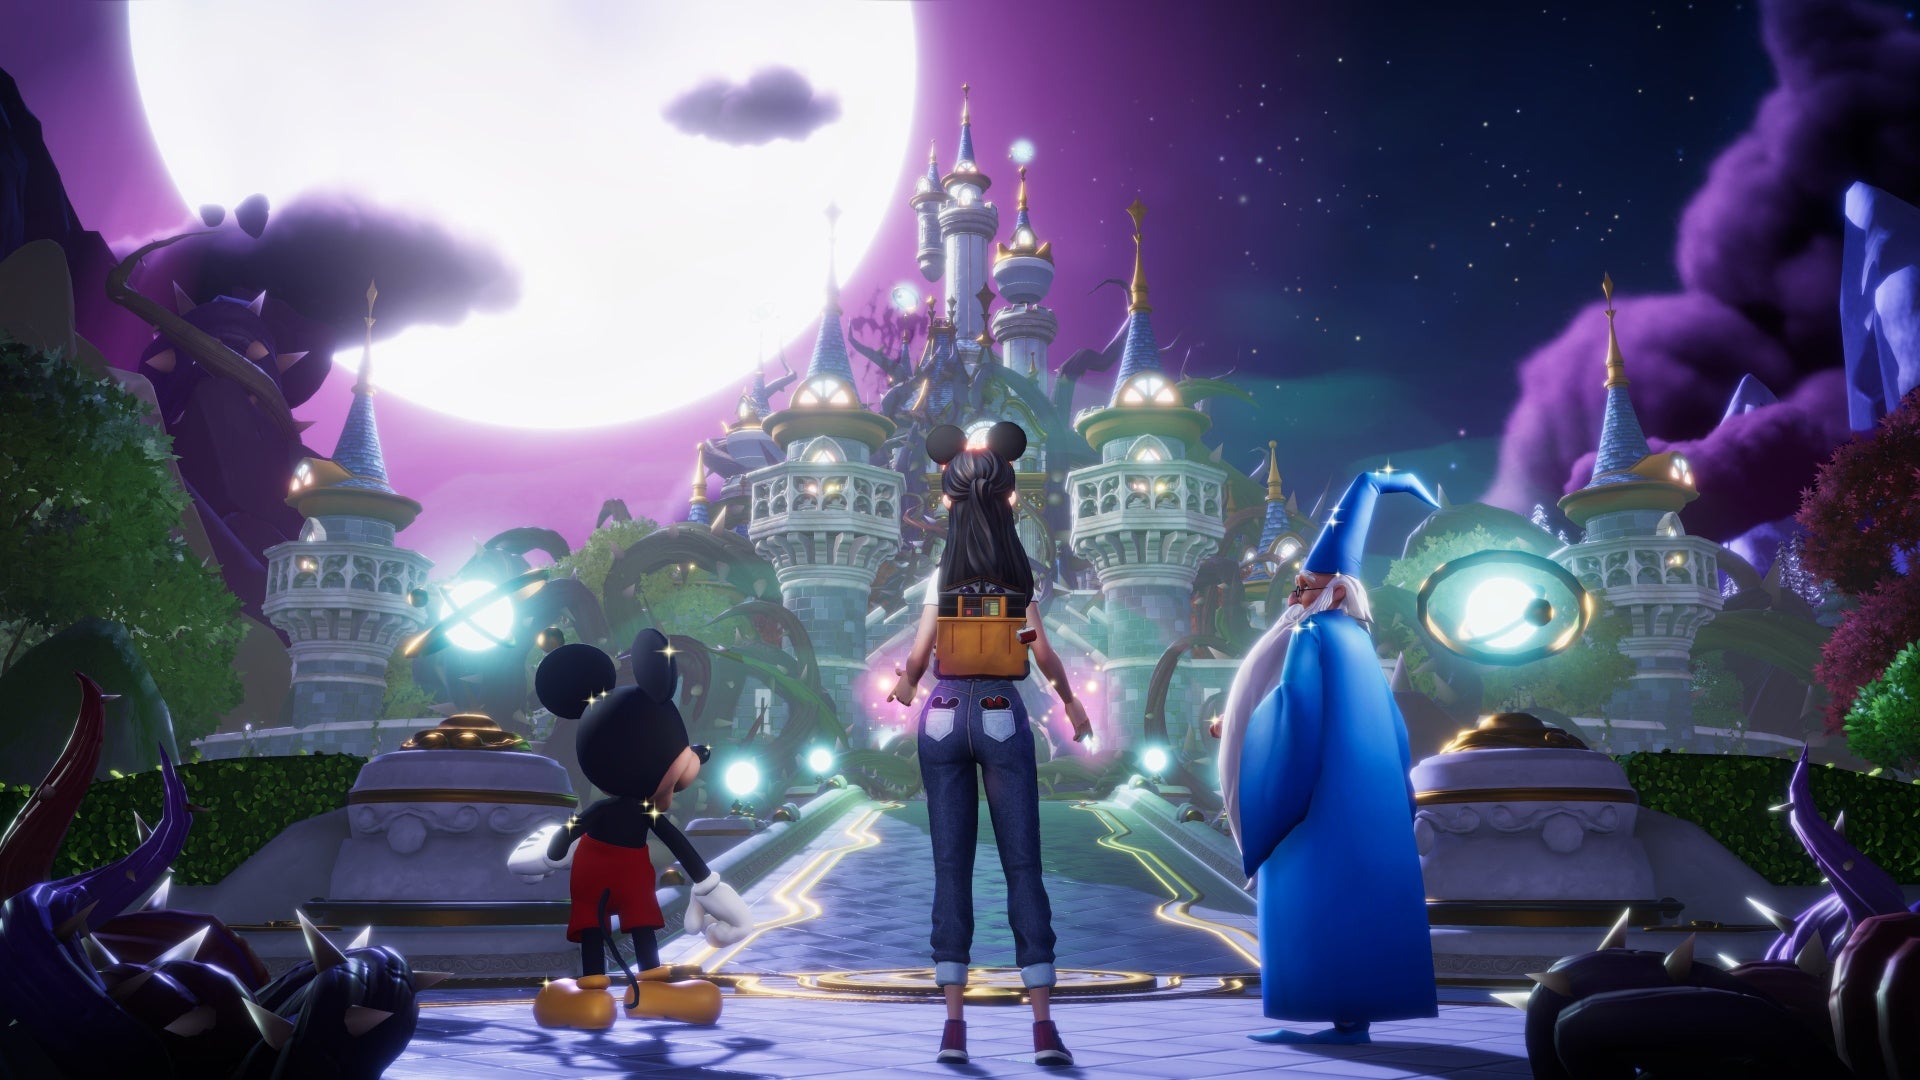 Mickey, Merlin, and the player character overlook a castle at night in Disney Dreamlight Valley